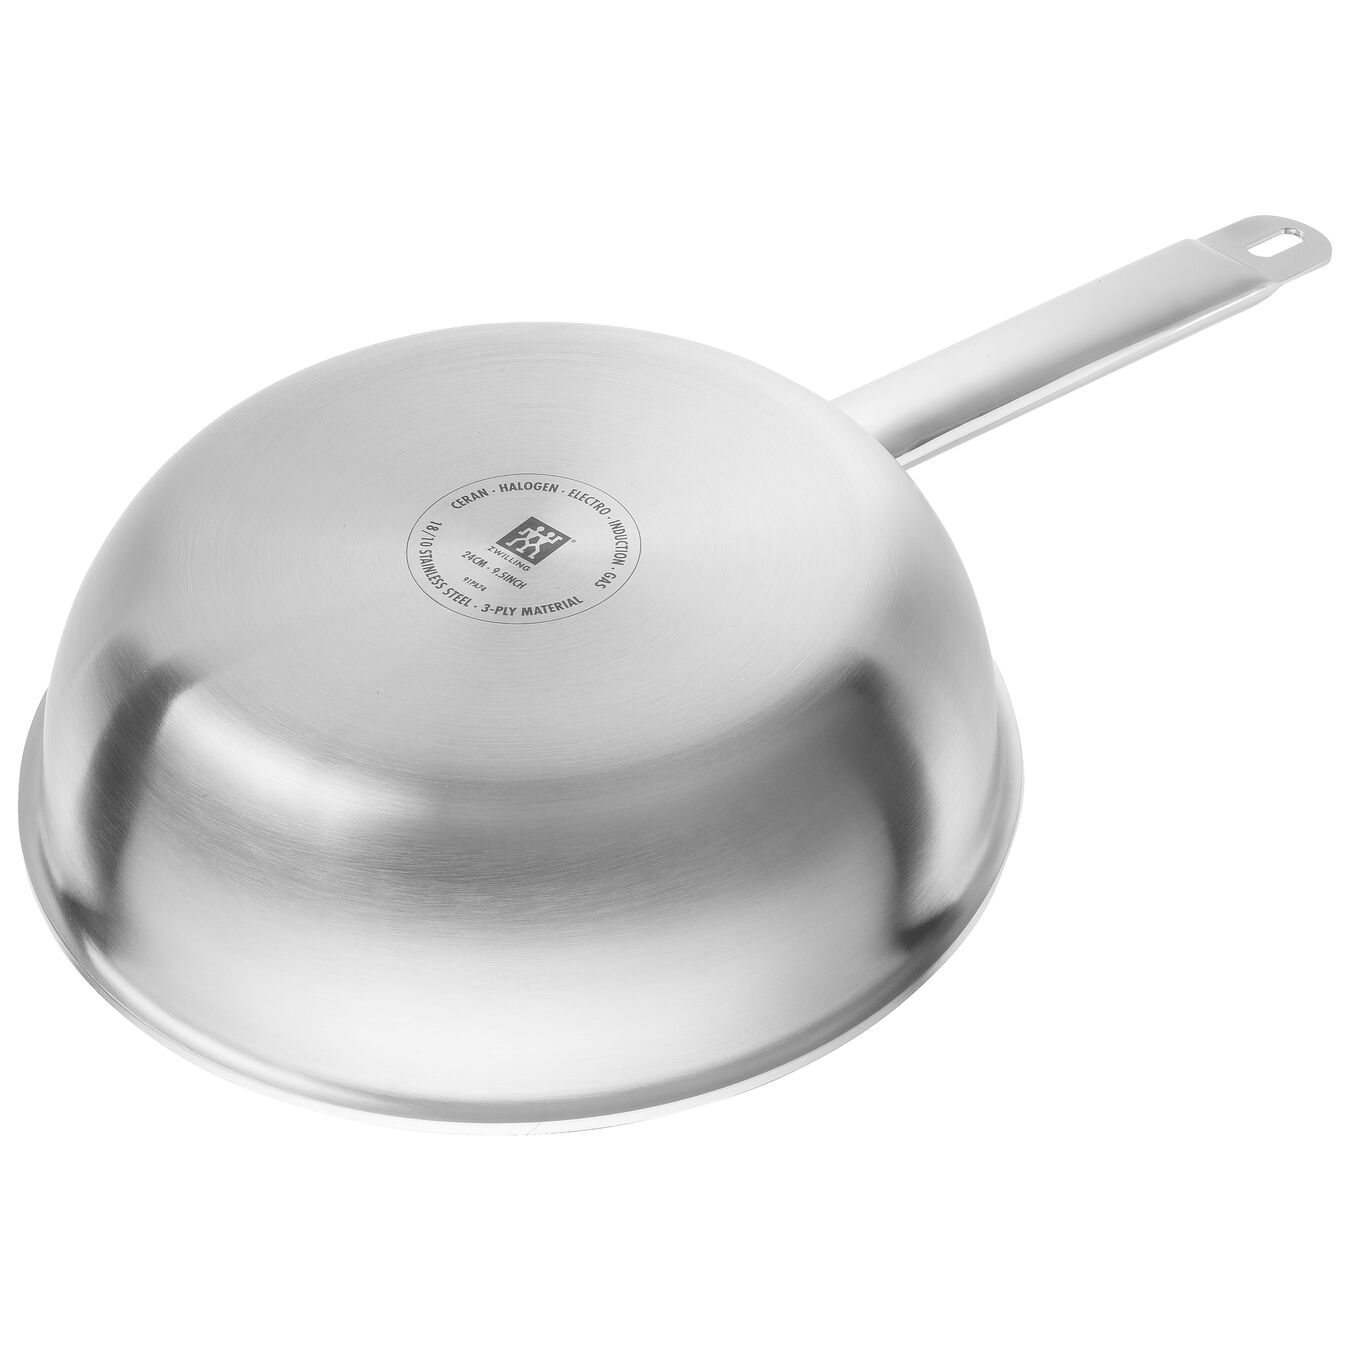 20 cm 18/10 Stainless Steel Frying pan silver,,large 3